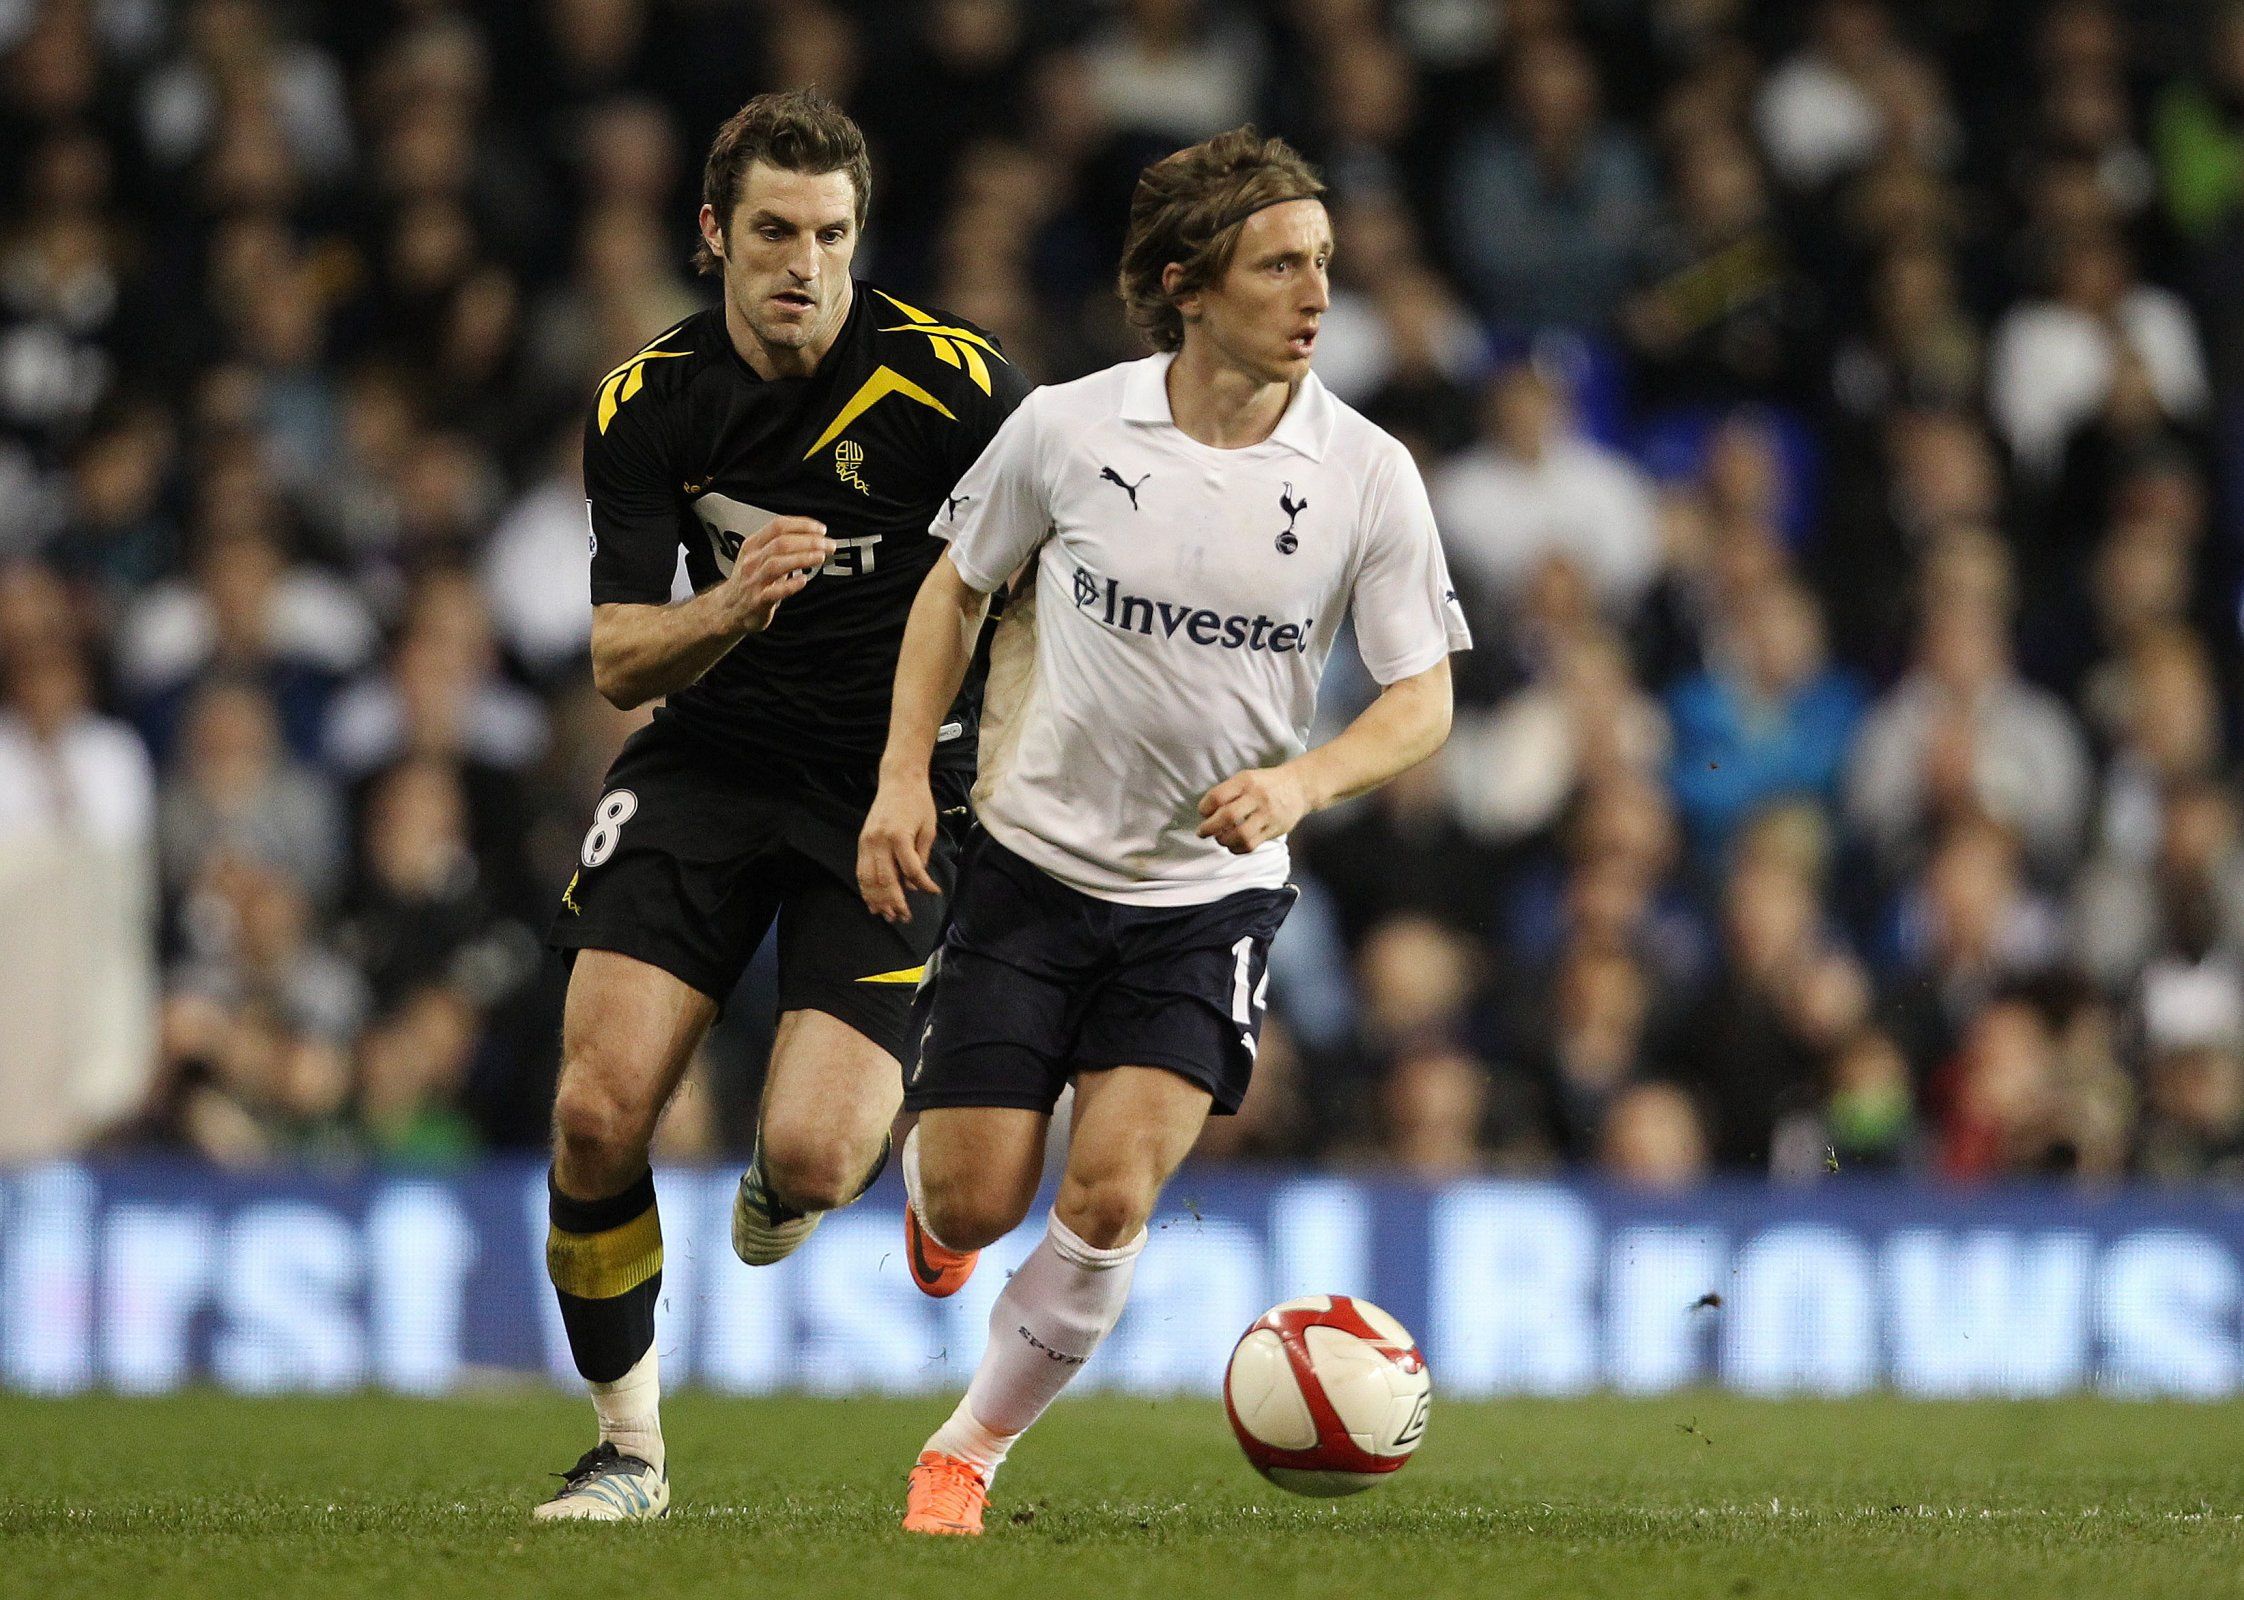 Real Madrid's signing of Luka Modric from Tottenham Hotspur latest  example of clubs jumping transfer gun